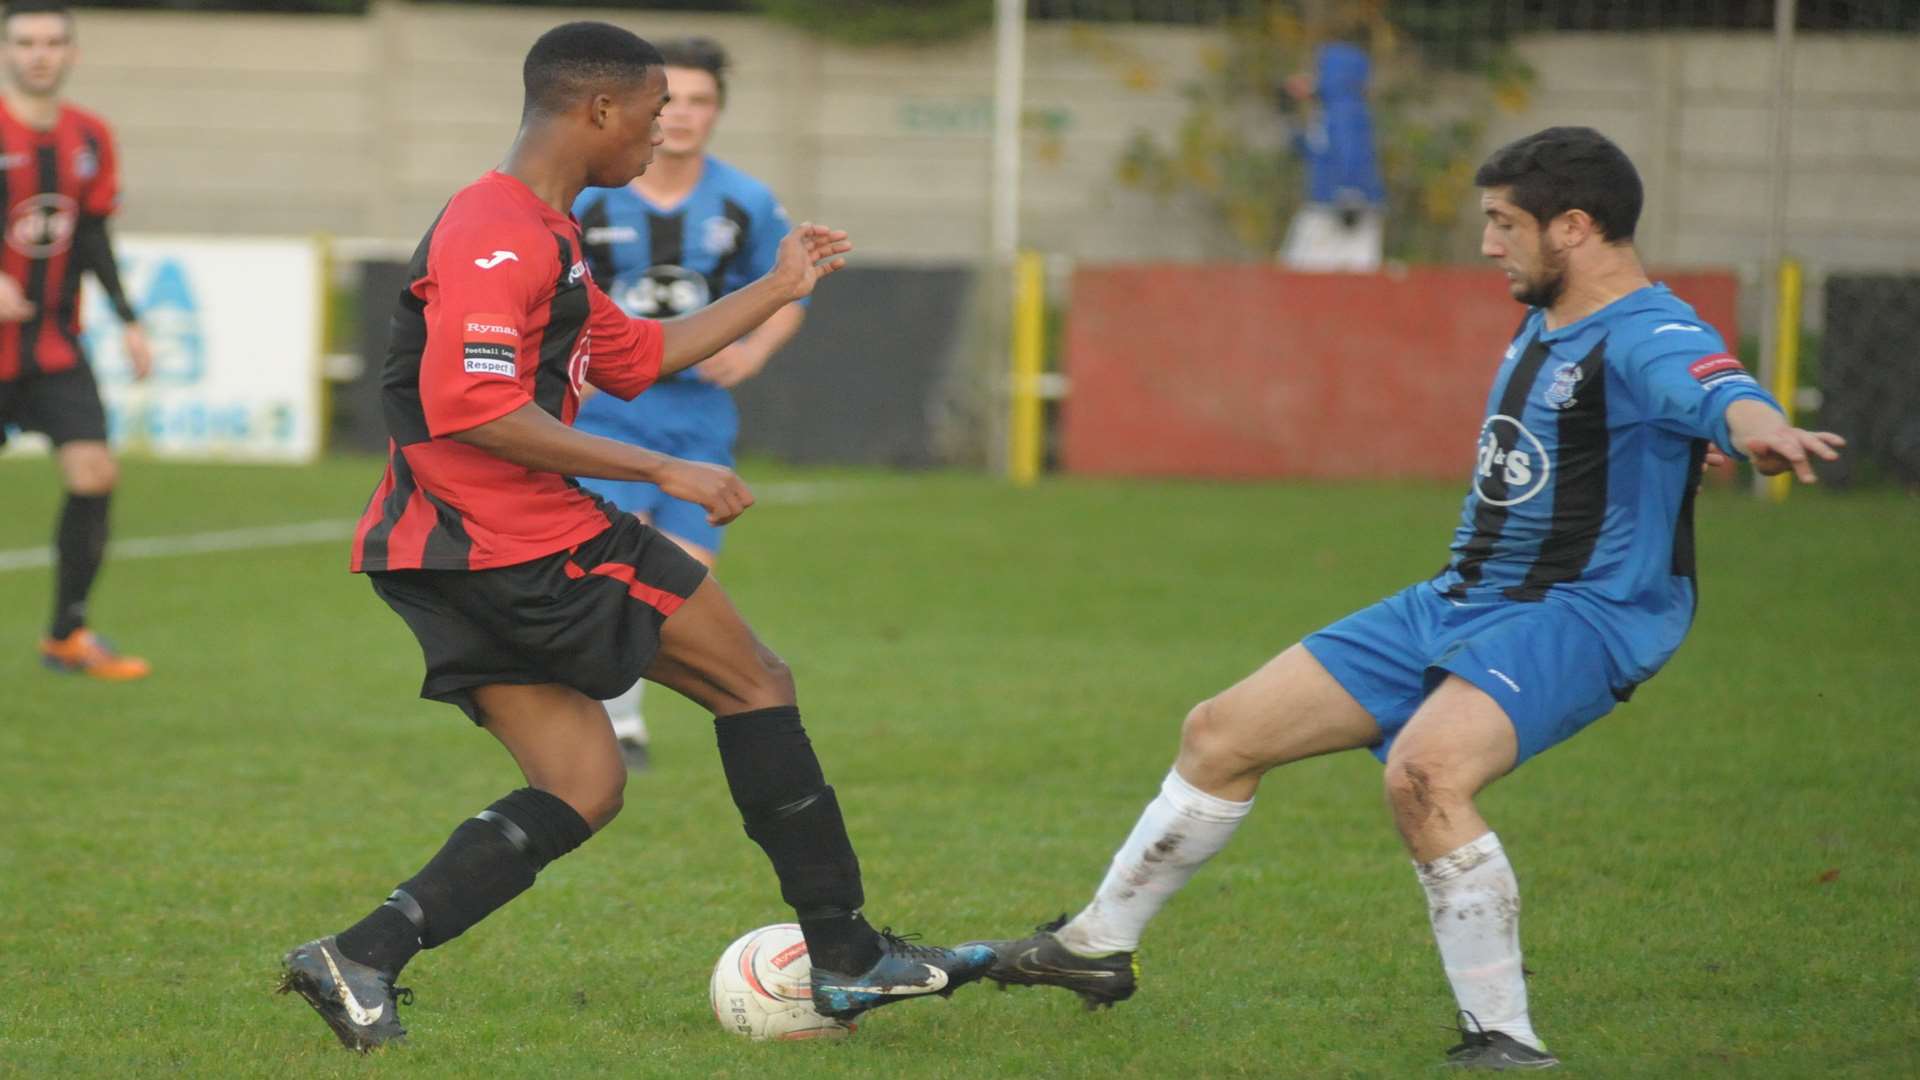 Chatham Town take on Waltham Abbey (blue) during Saturday's goalless draw in Ryman League, Division 1 North